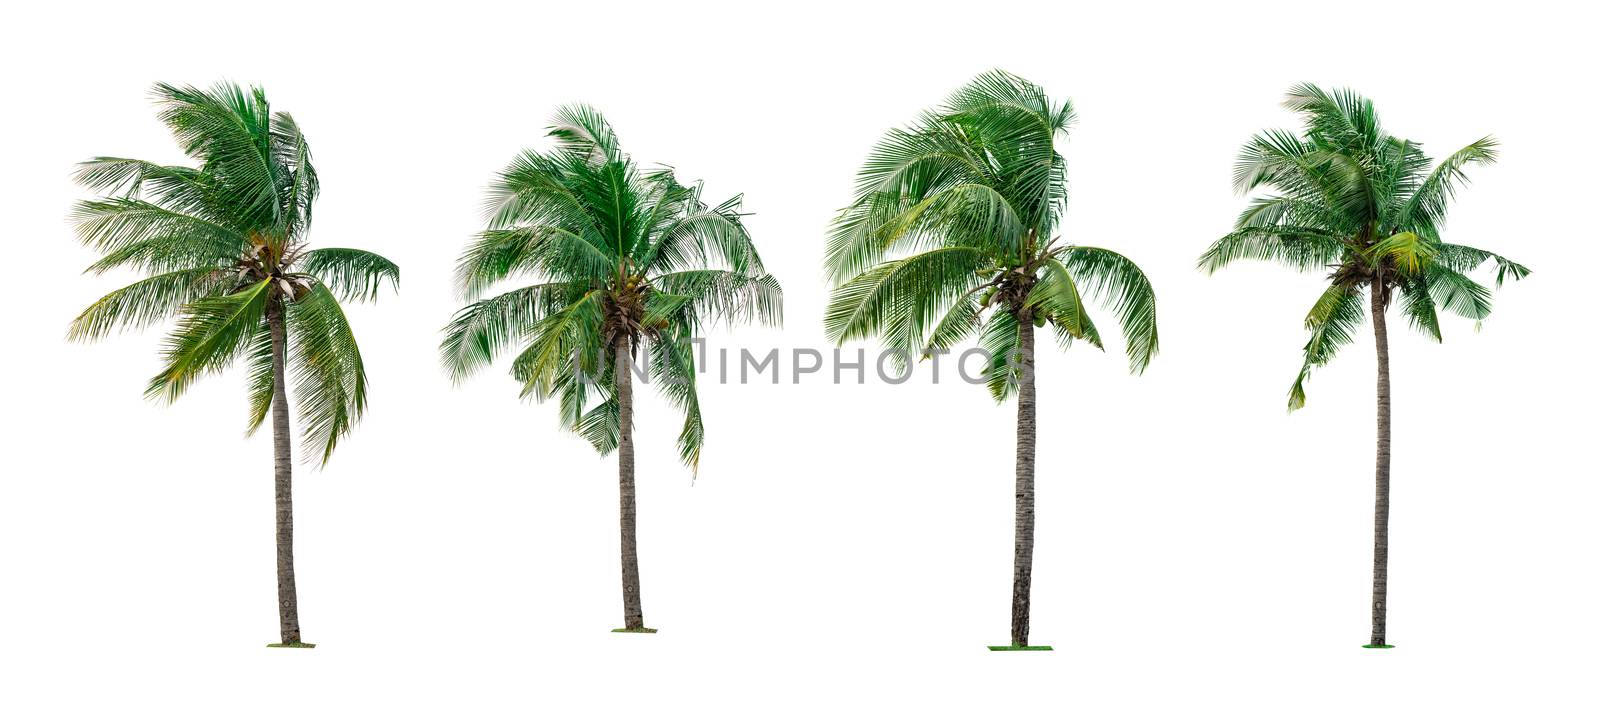 Set of coconut tree isolated on white background used for advert by Fahroni